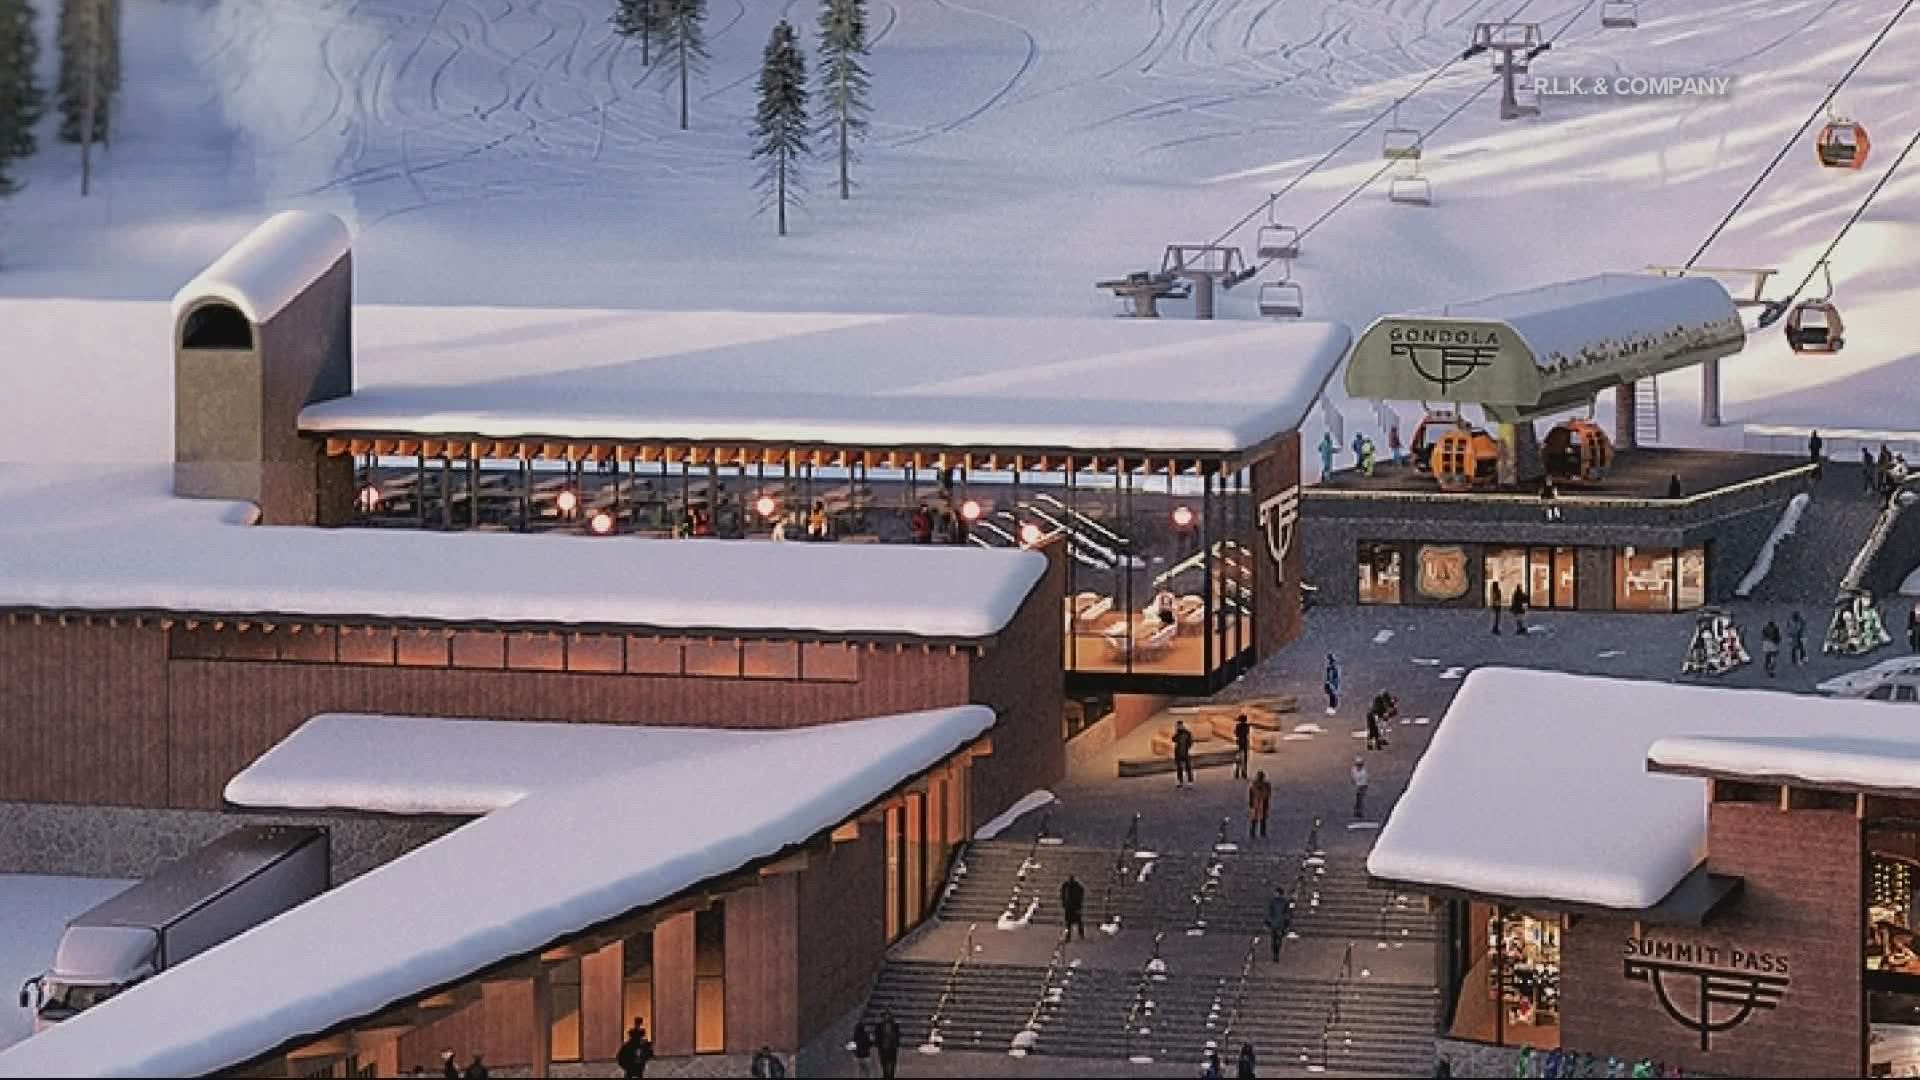 Timberline Lodge has an outline for improvements for the next decade.